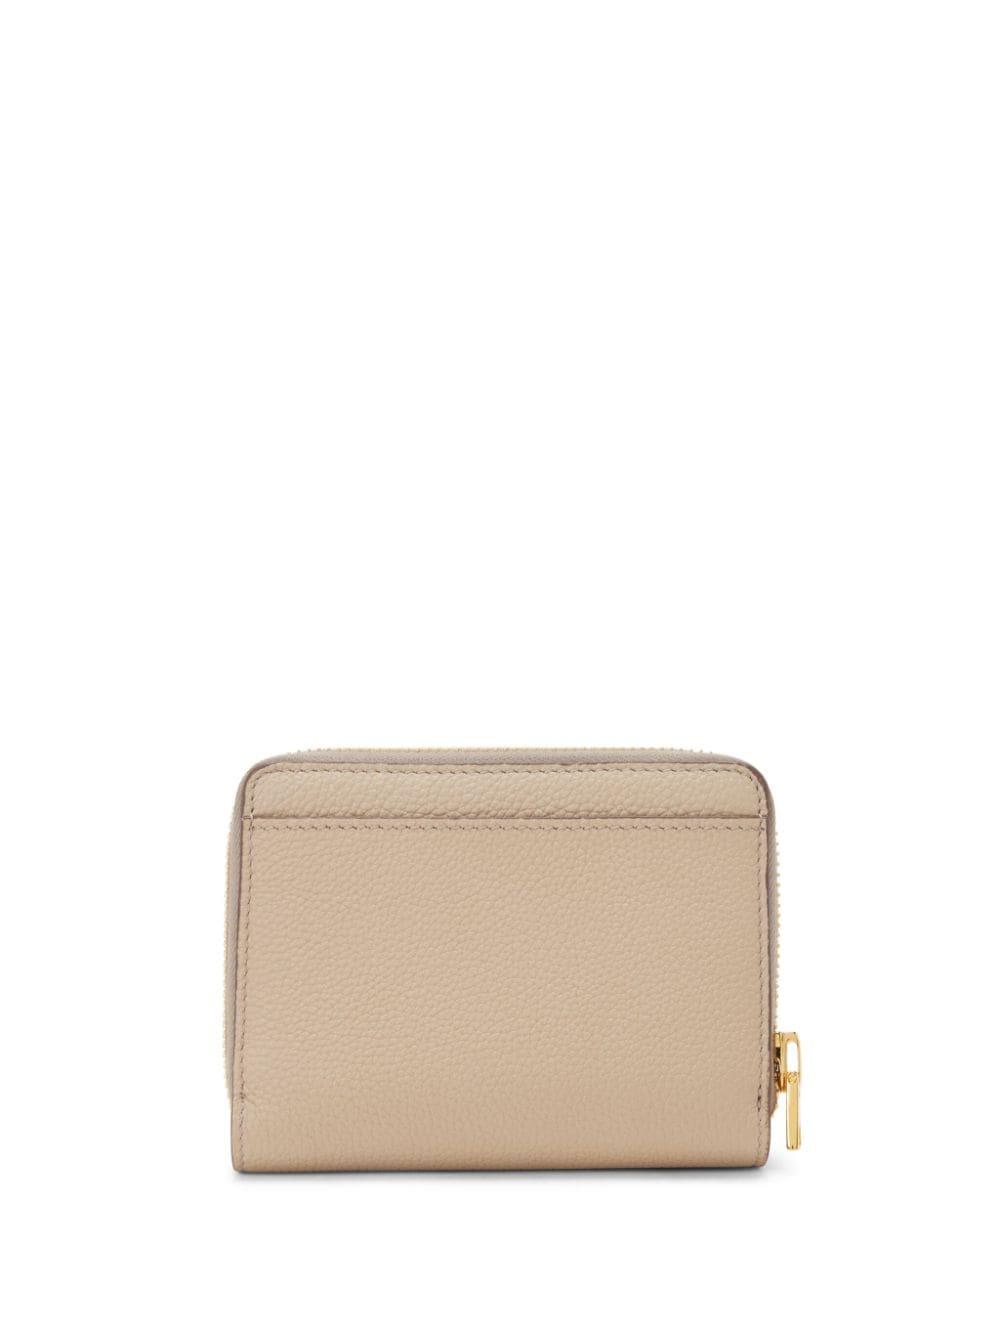 TOM FORD logo-plaque leather wallet - Neutrals